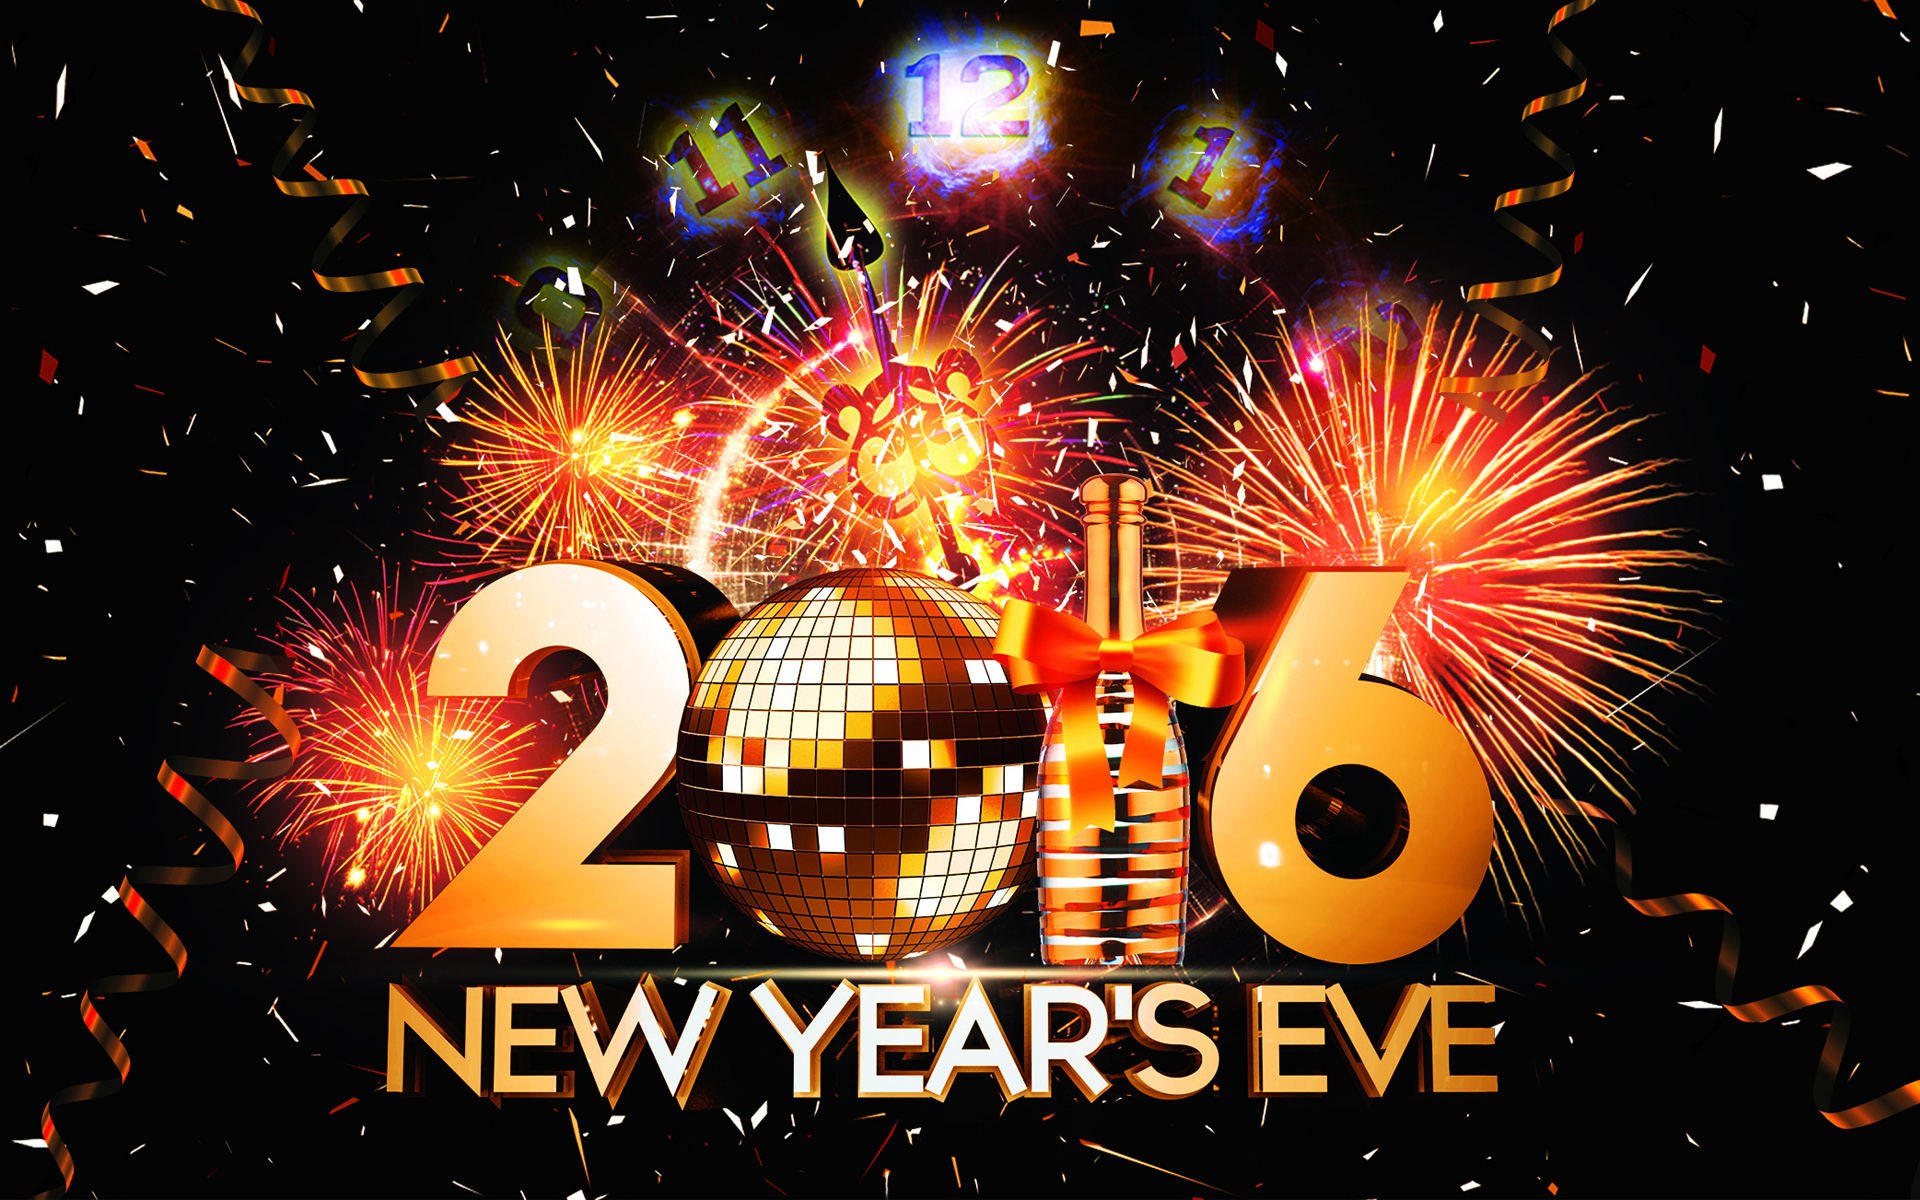 New Year Eve Wallpaper - New Year's Eve Hd - HD Wallpaper 